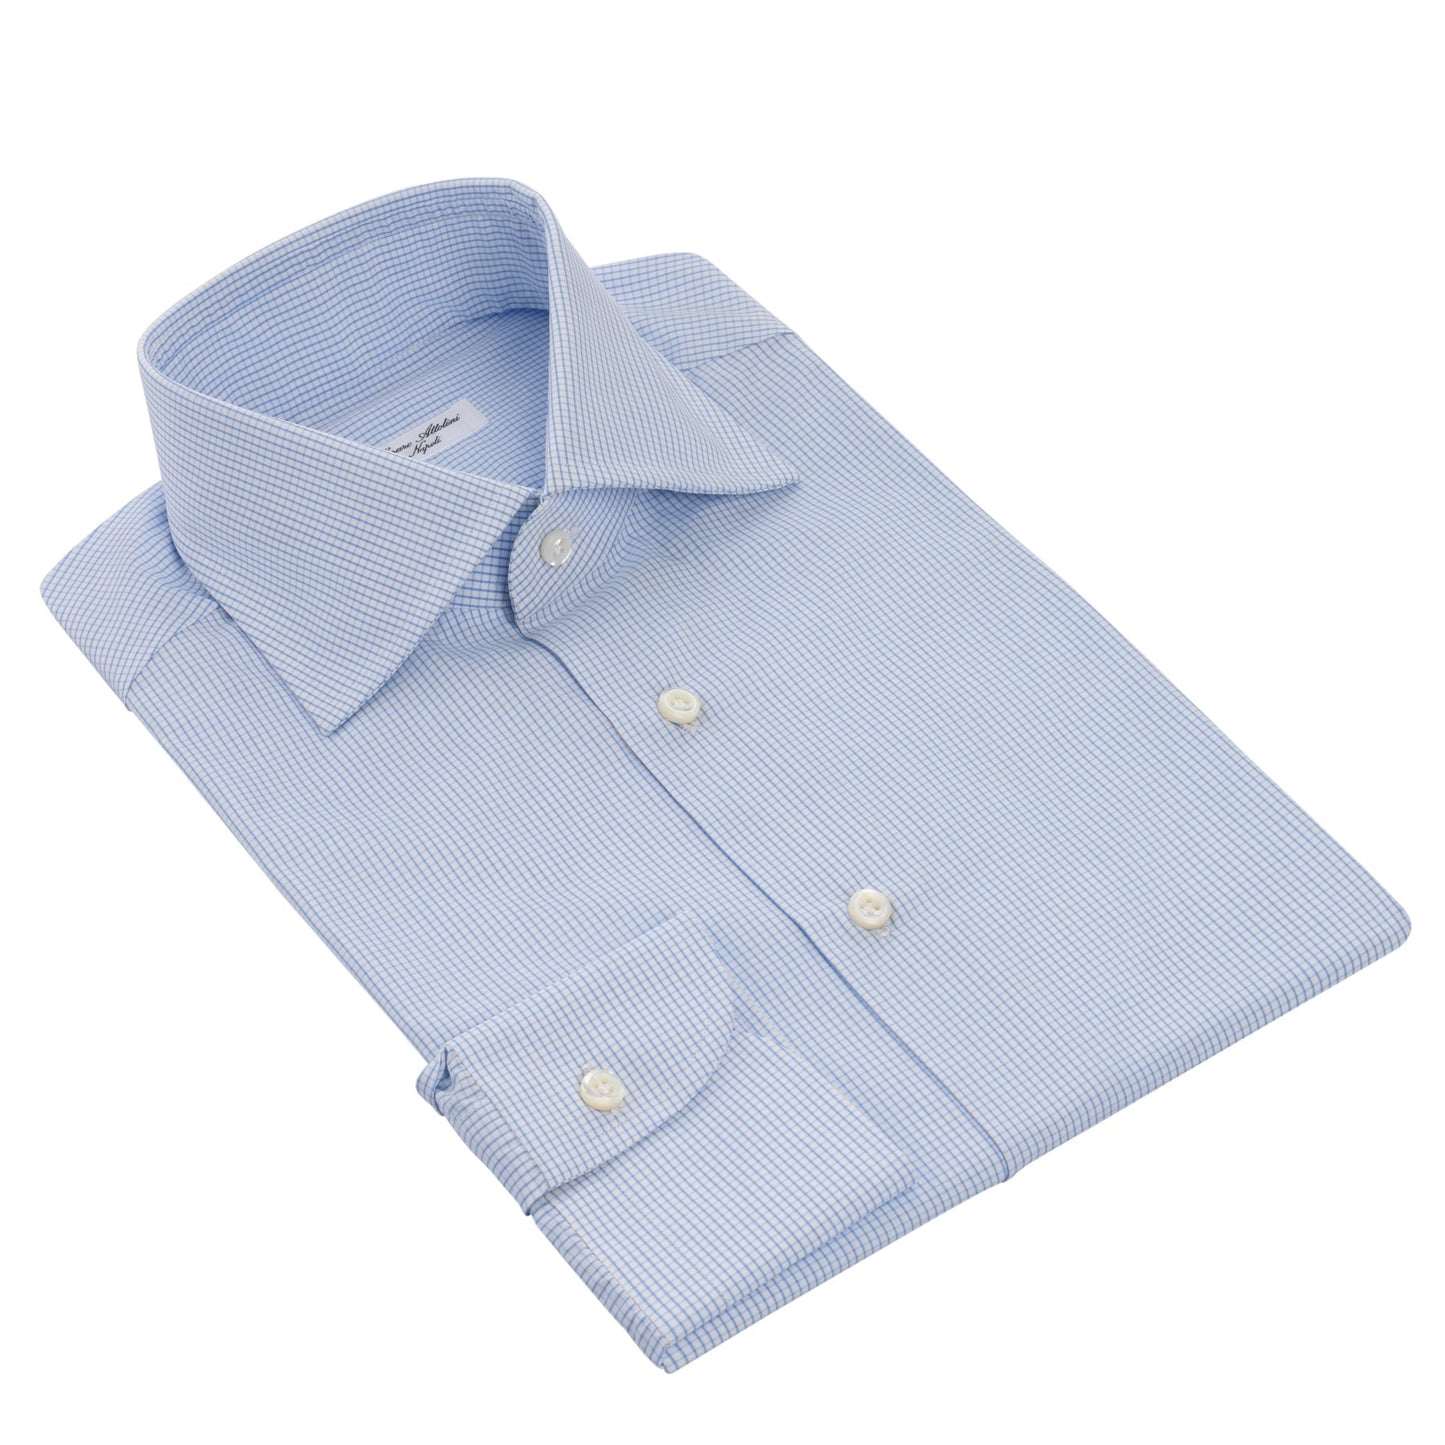 Cesare Attolini Tailored-Fit Checked Cotton Shirt in Light Blue - SARTALE